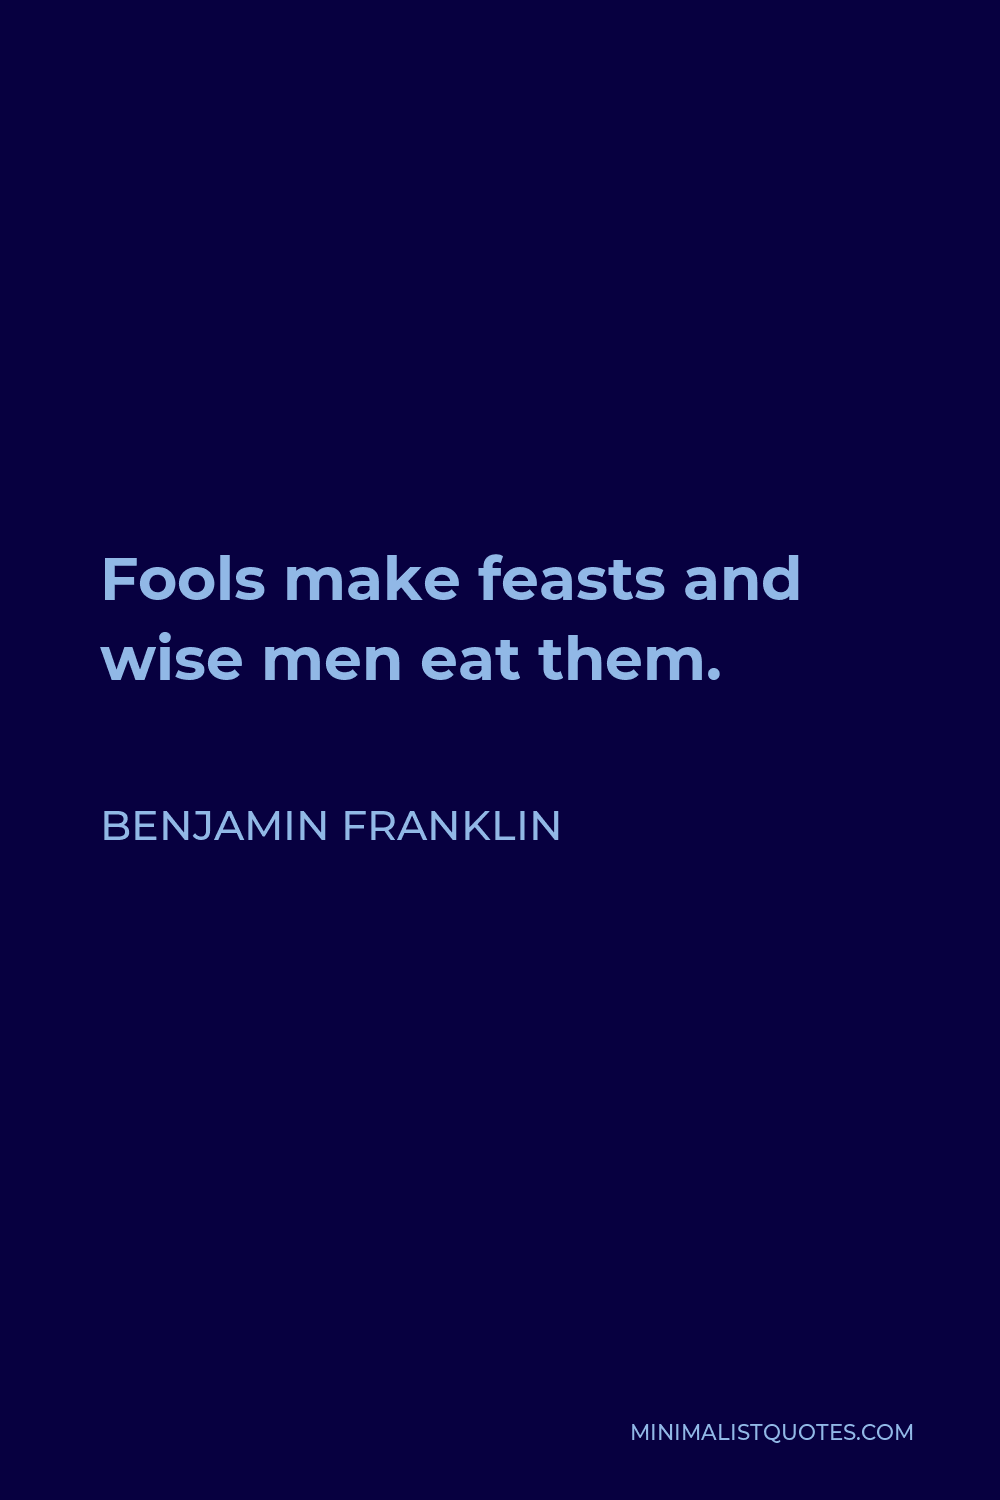 Benjamin Franklin Quote - Fools make feasts and wise men eat them.